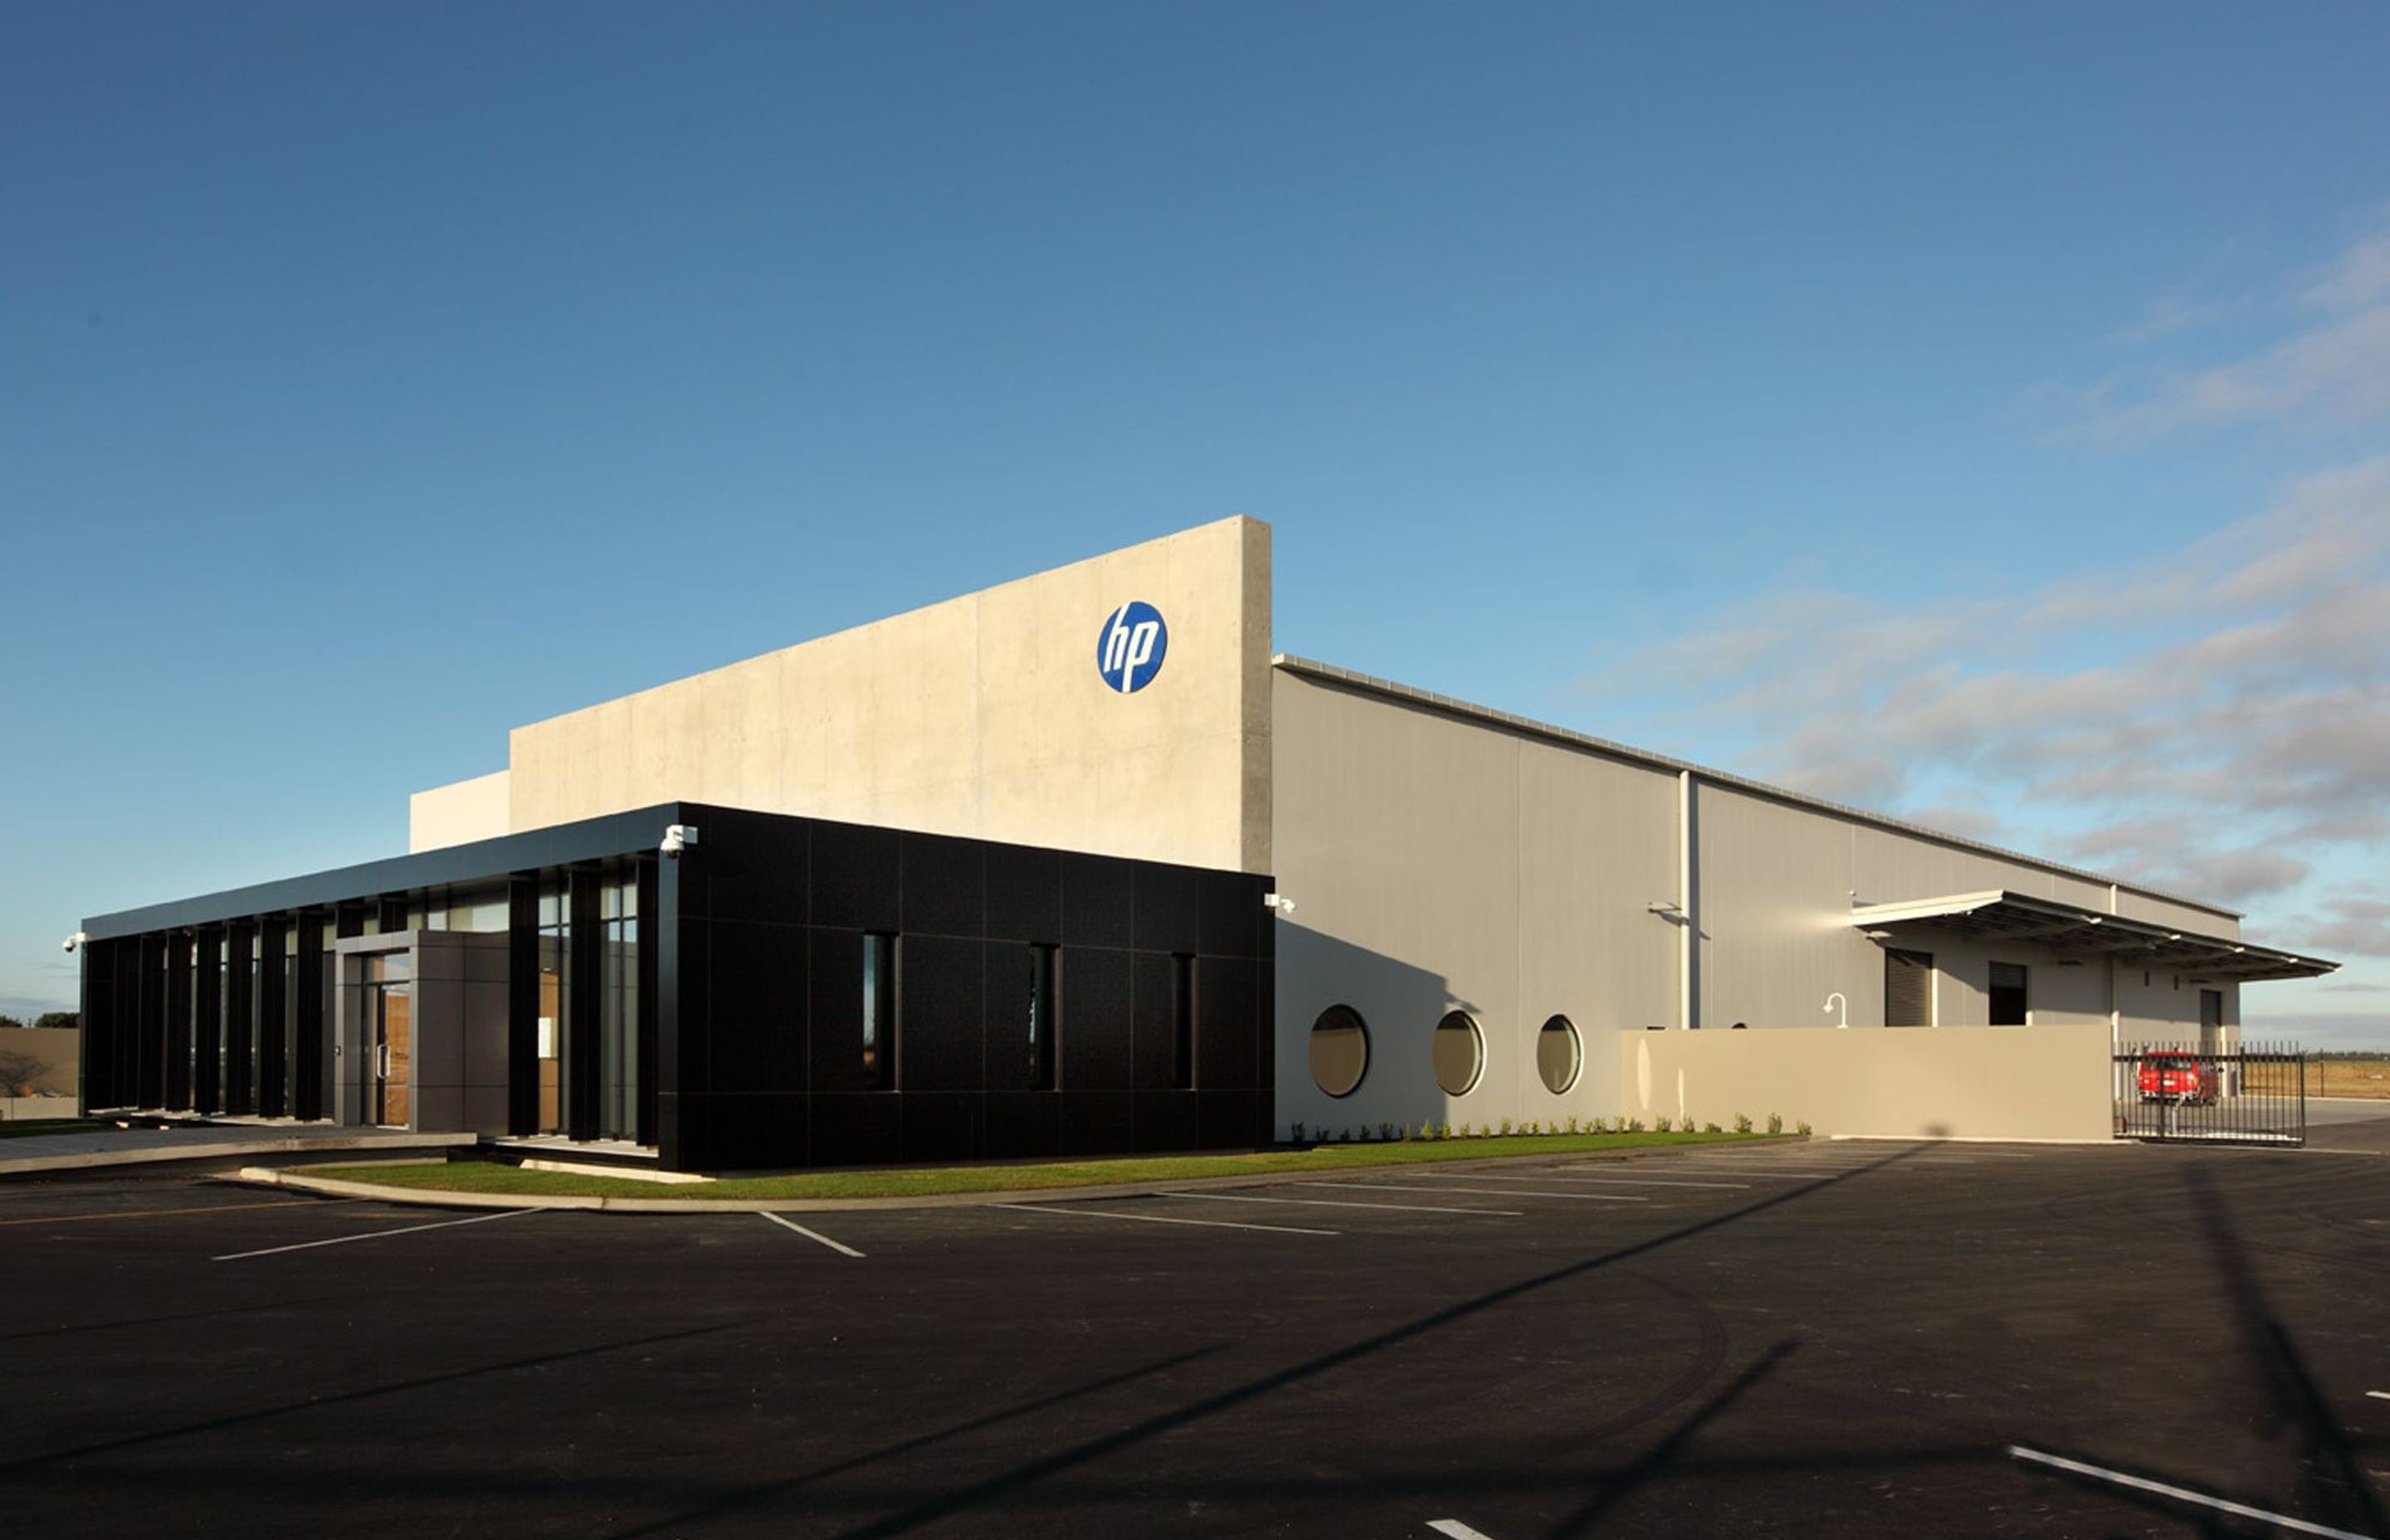 HP Office and Warehouse Building